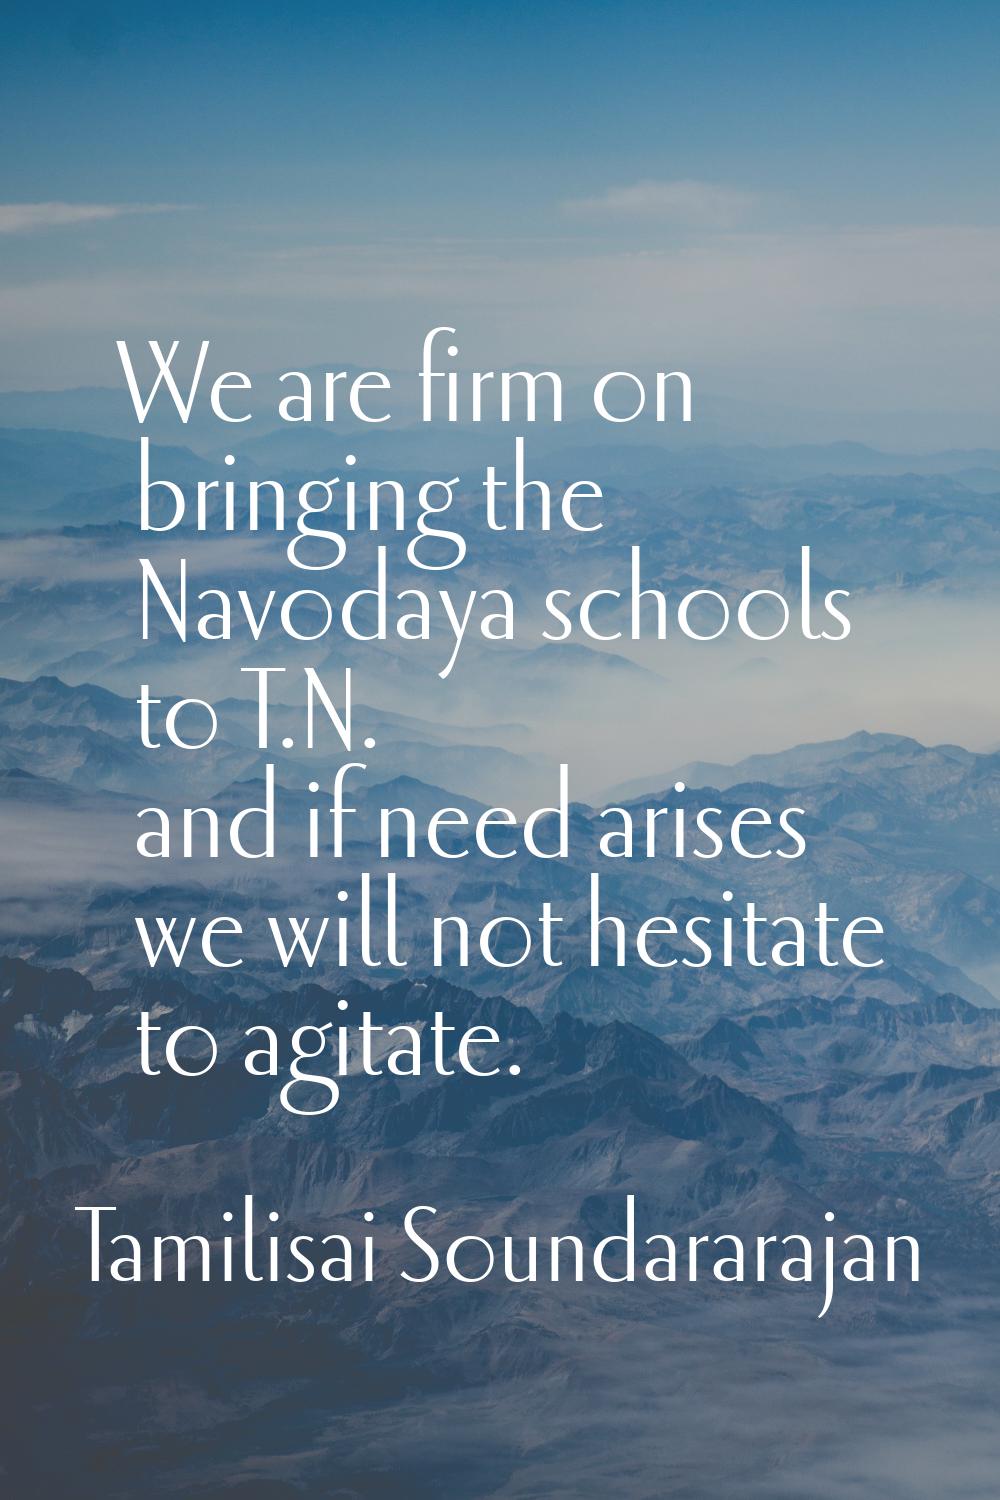 We are firm on bringing the Navodaya schools to T.N. and if need arises we will not hesitate to agi